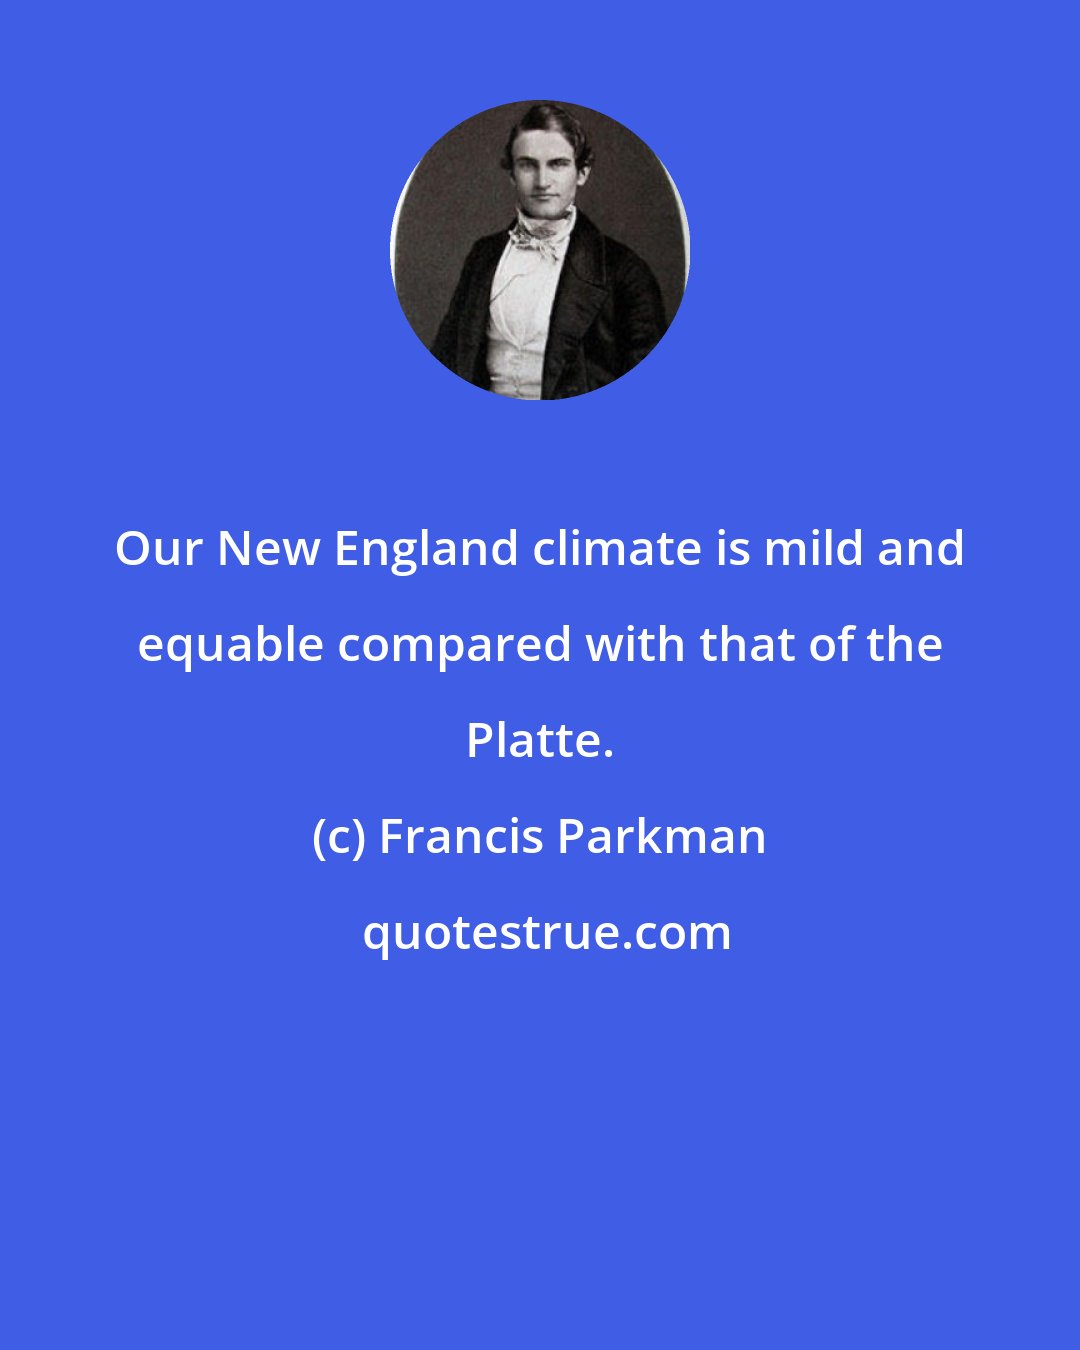 Francis Parkman: Our New England climate is mild and equable compared with that of the Platte.